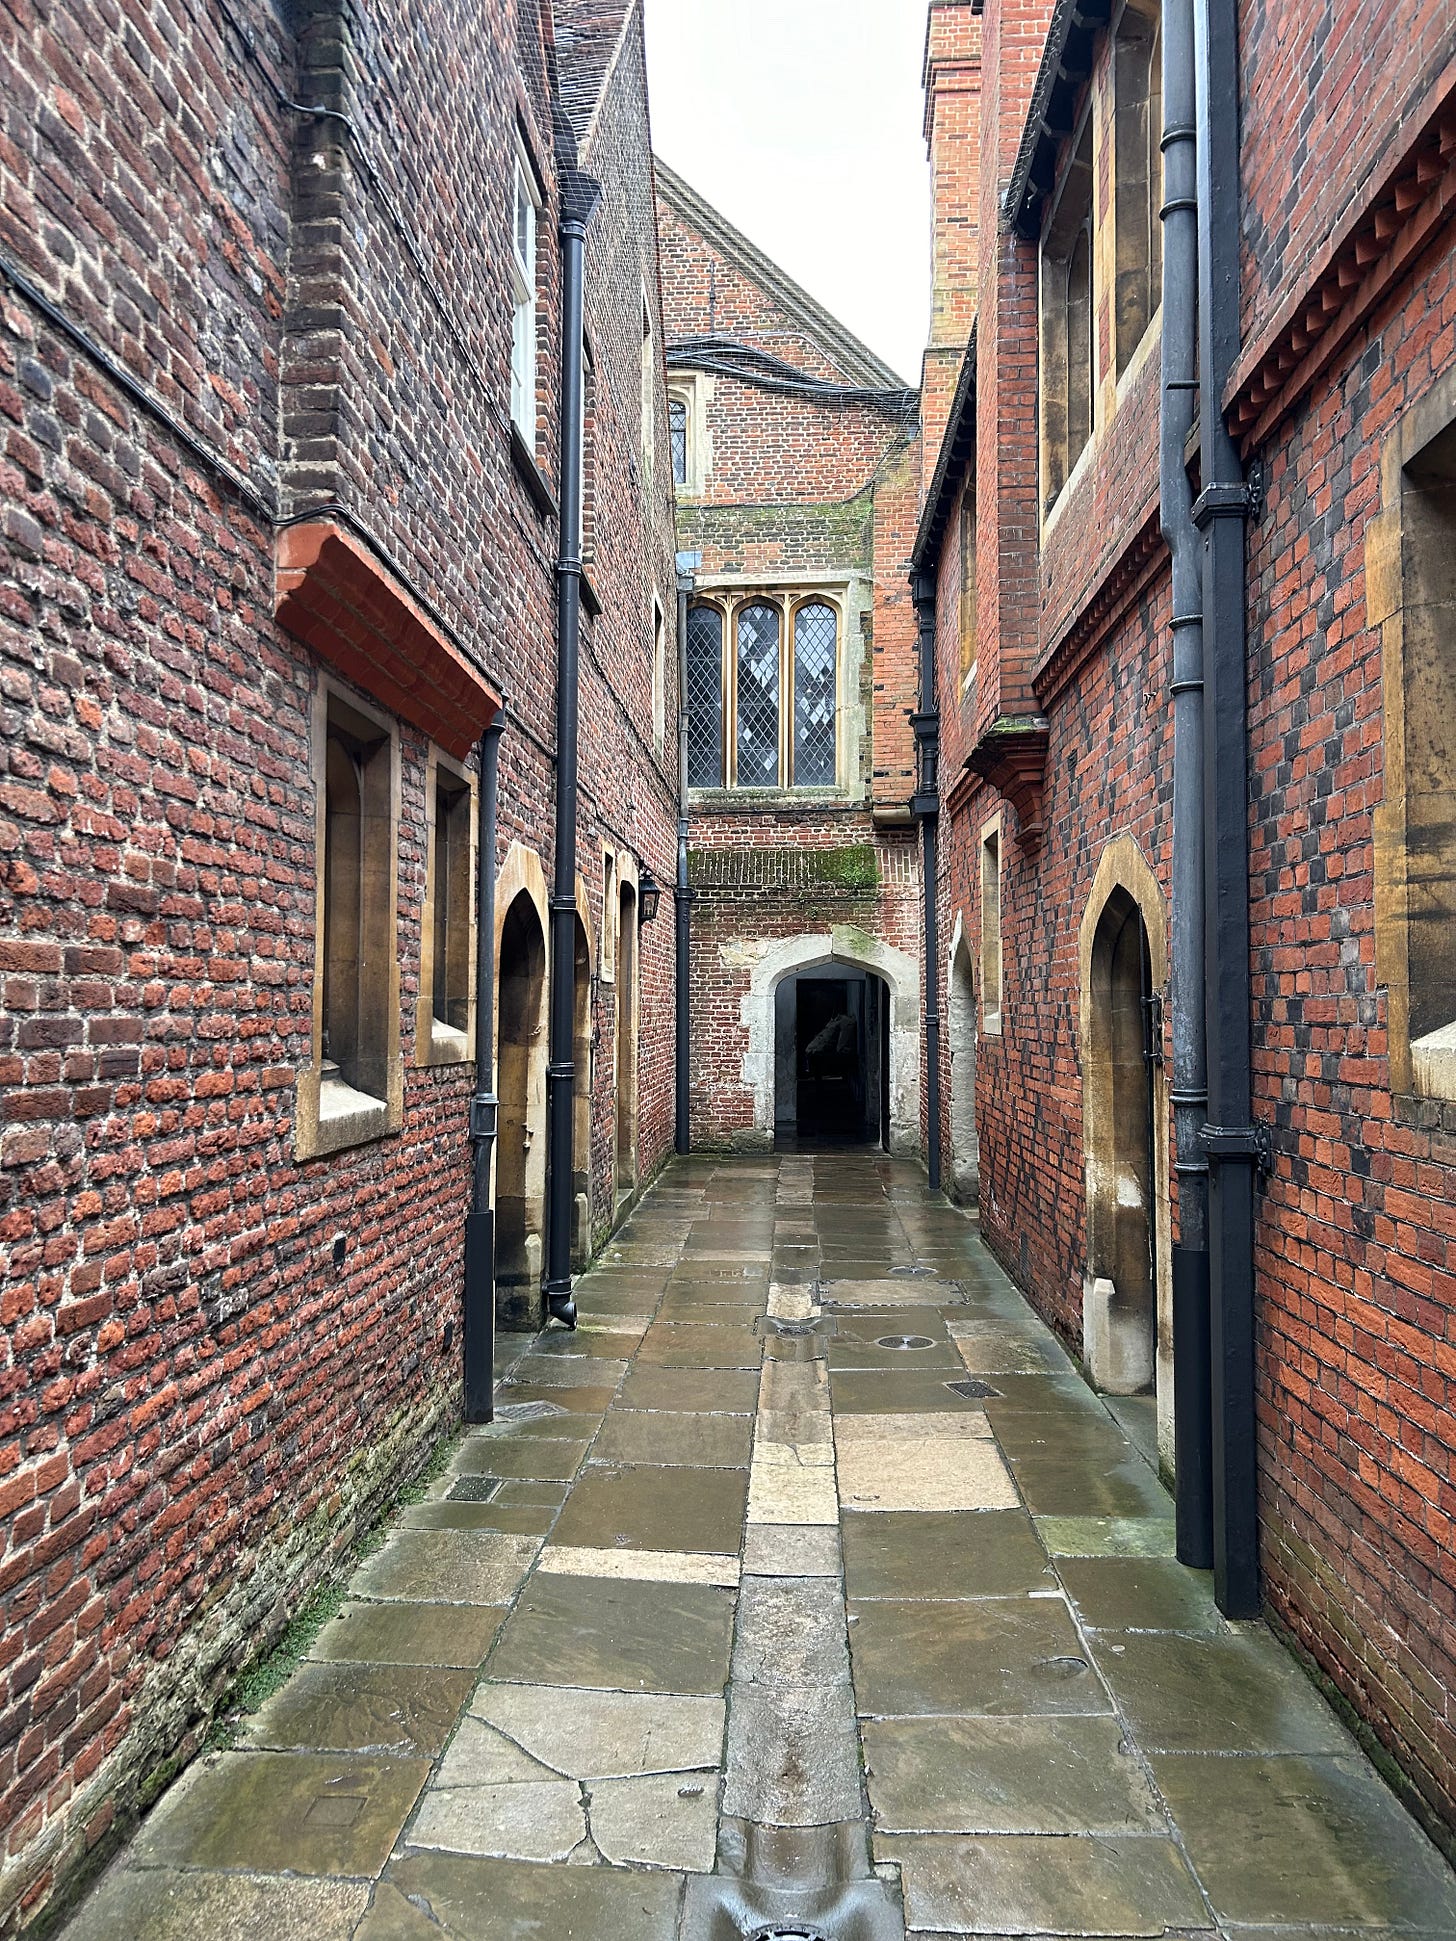 A red brick series of walls, passages, and windows, obviously old. It is a wet and grey day, and the flagstones of the alleyway are wet.